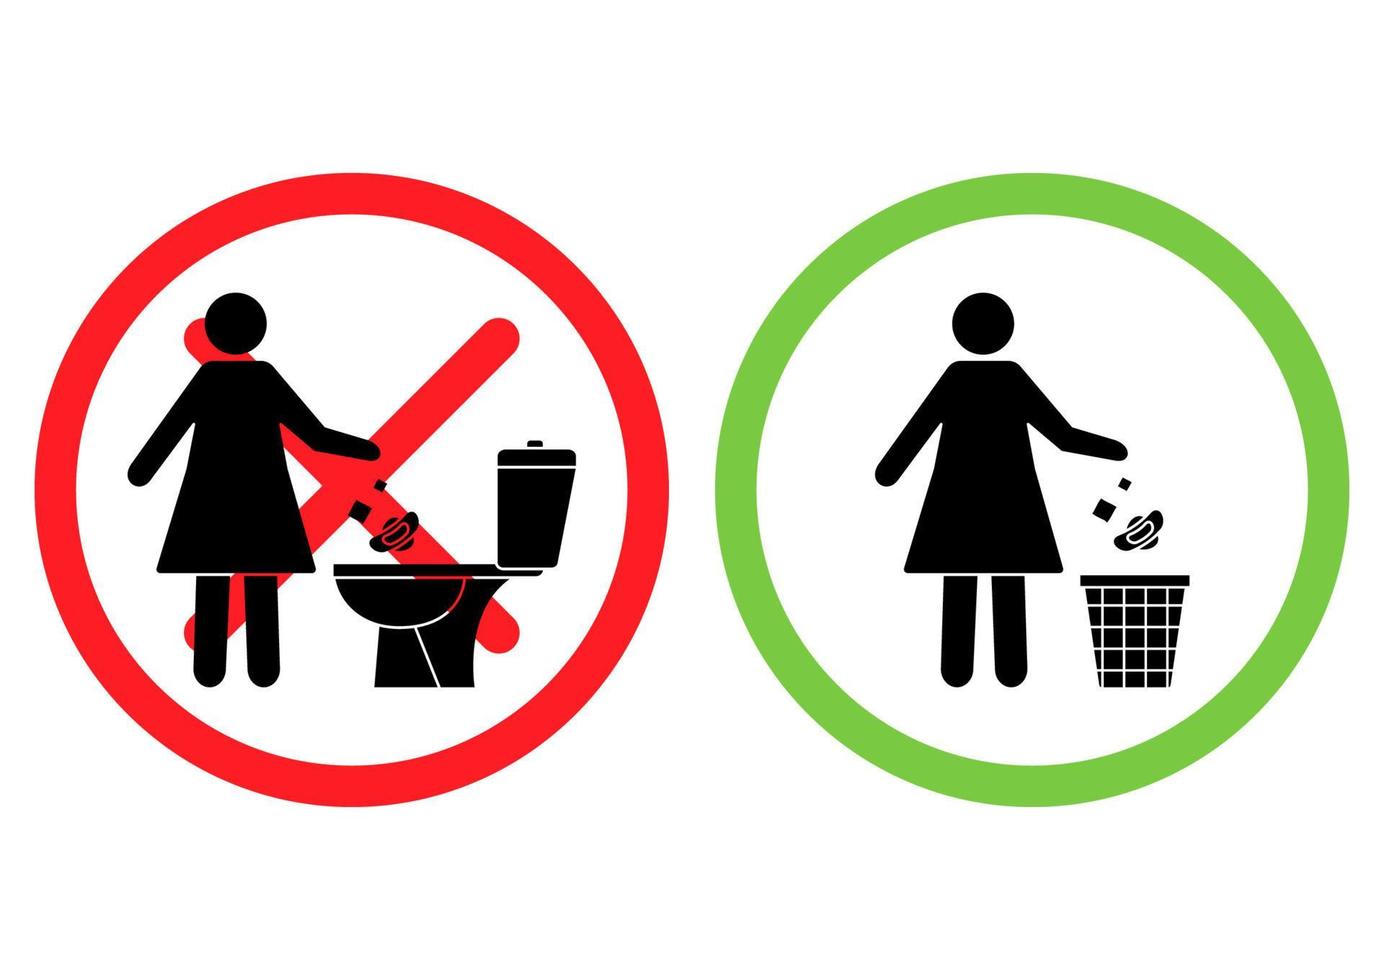 Do not litter in the toilet. Toilet no trash. Woman throws sanitary towels in the lavatory. Please use trash can for paper towels, sanitary products. Prohibition icons. Forbidden placard vector